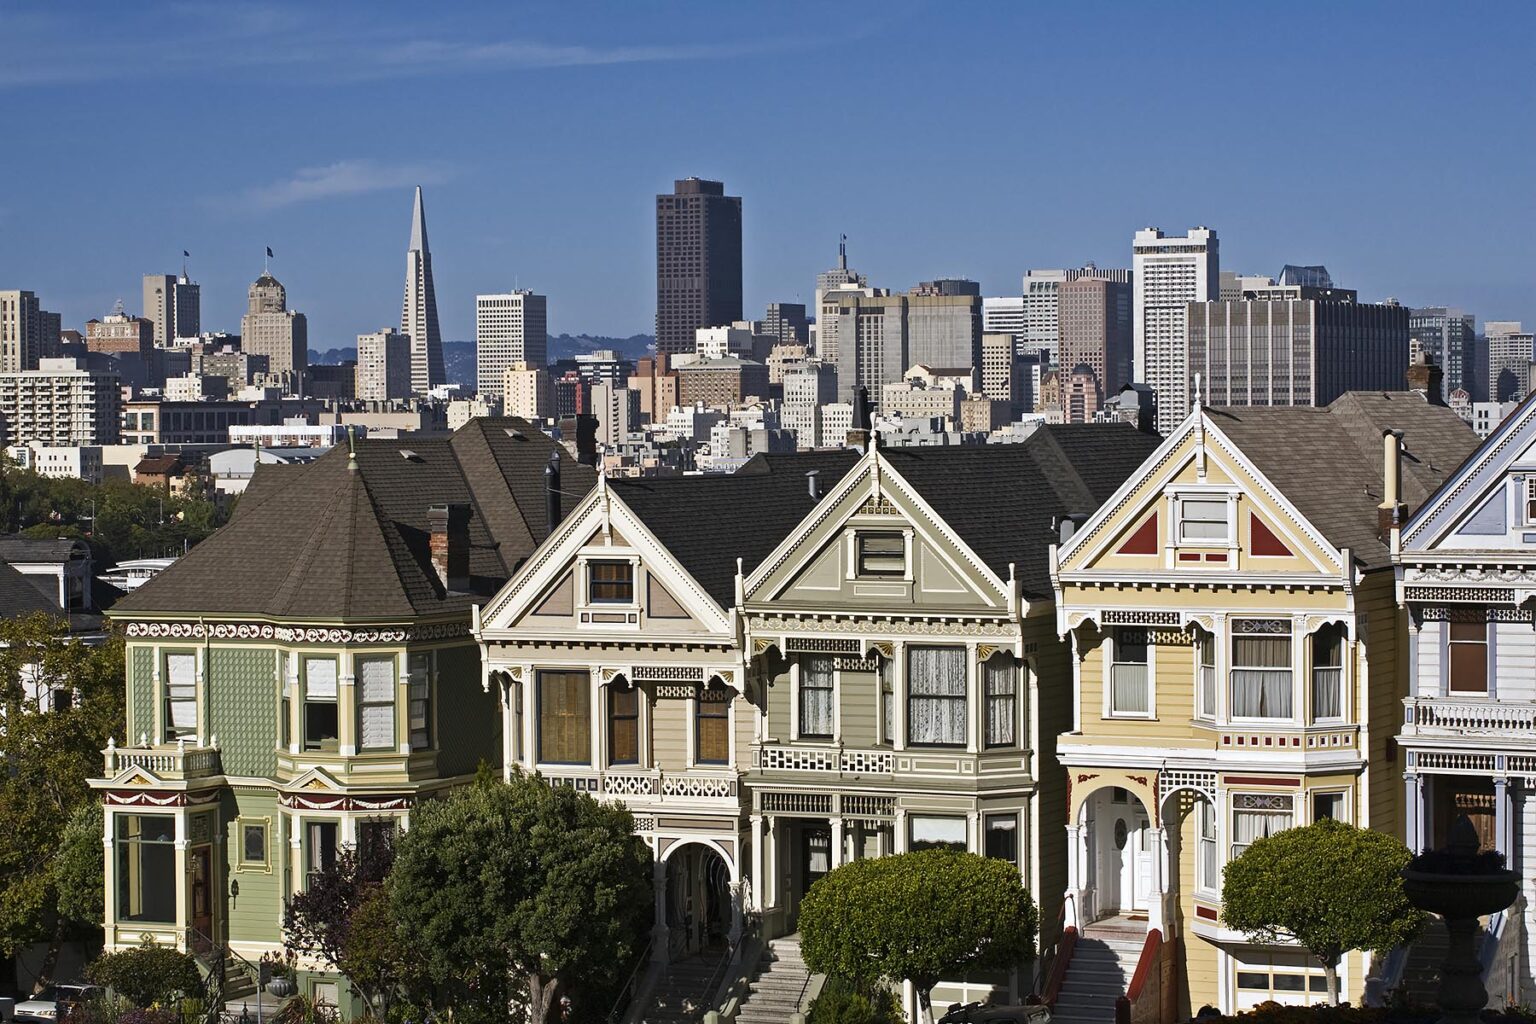 Classic view of VICTORIAN HOUSES and cityscape including the TRANSAMERICA PYRAMID BUILDING from ALAMO PARK - SAN FRANCISCO, CALIFORNIA